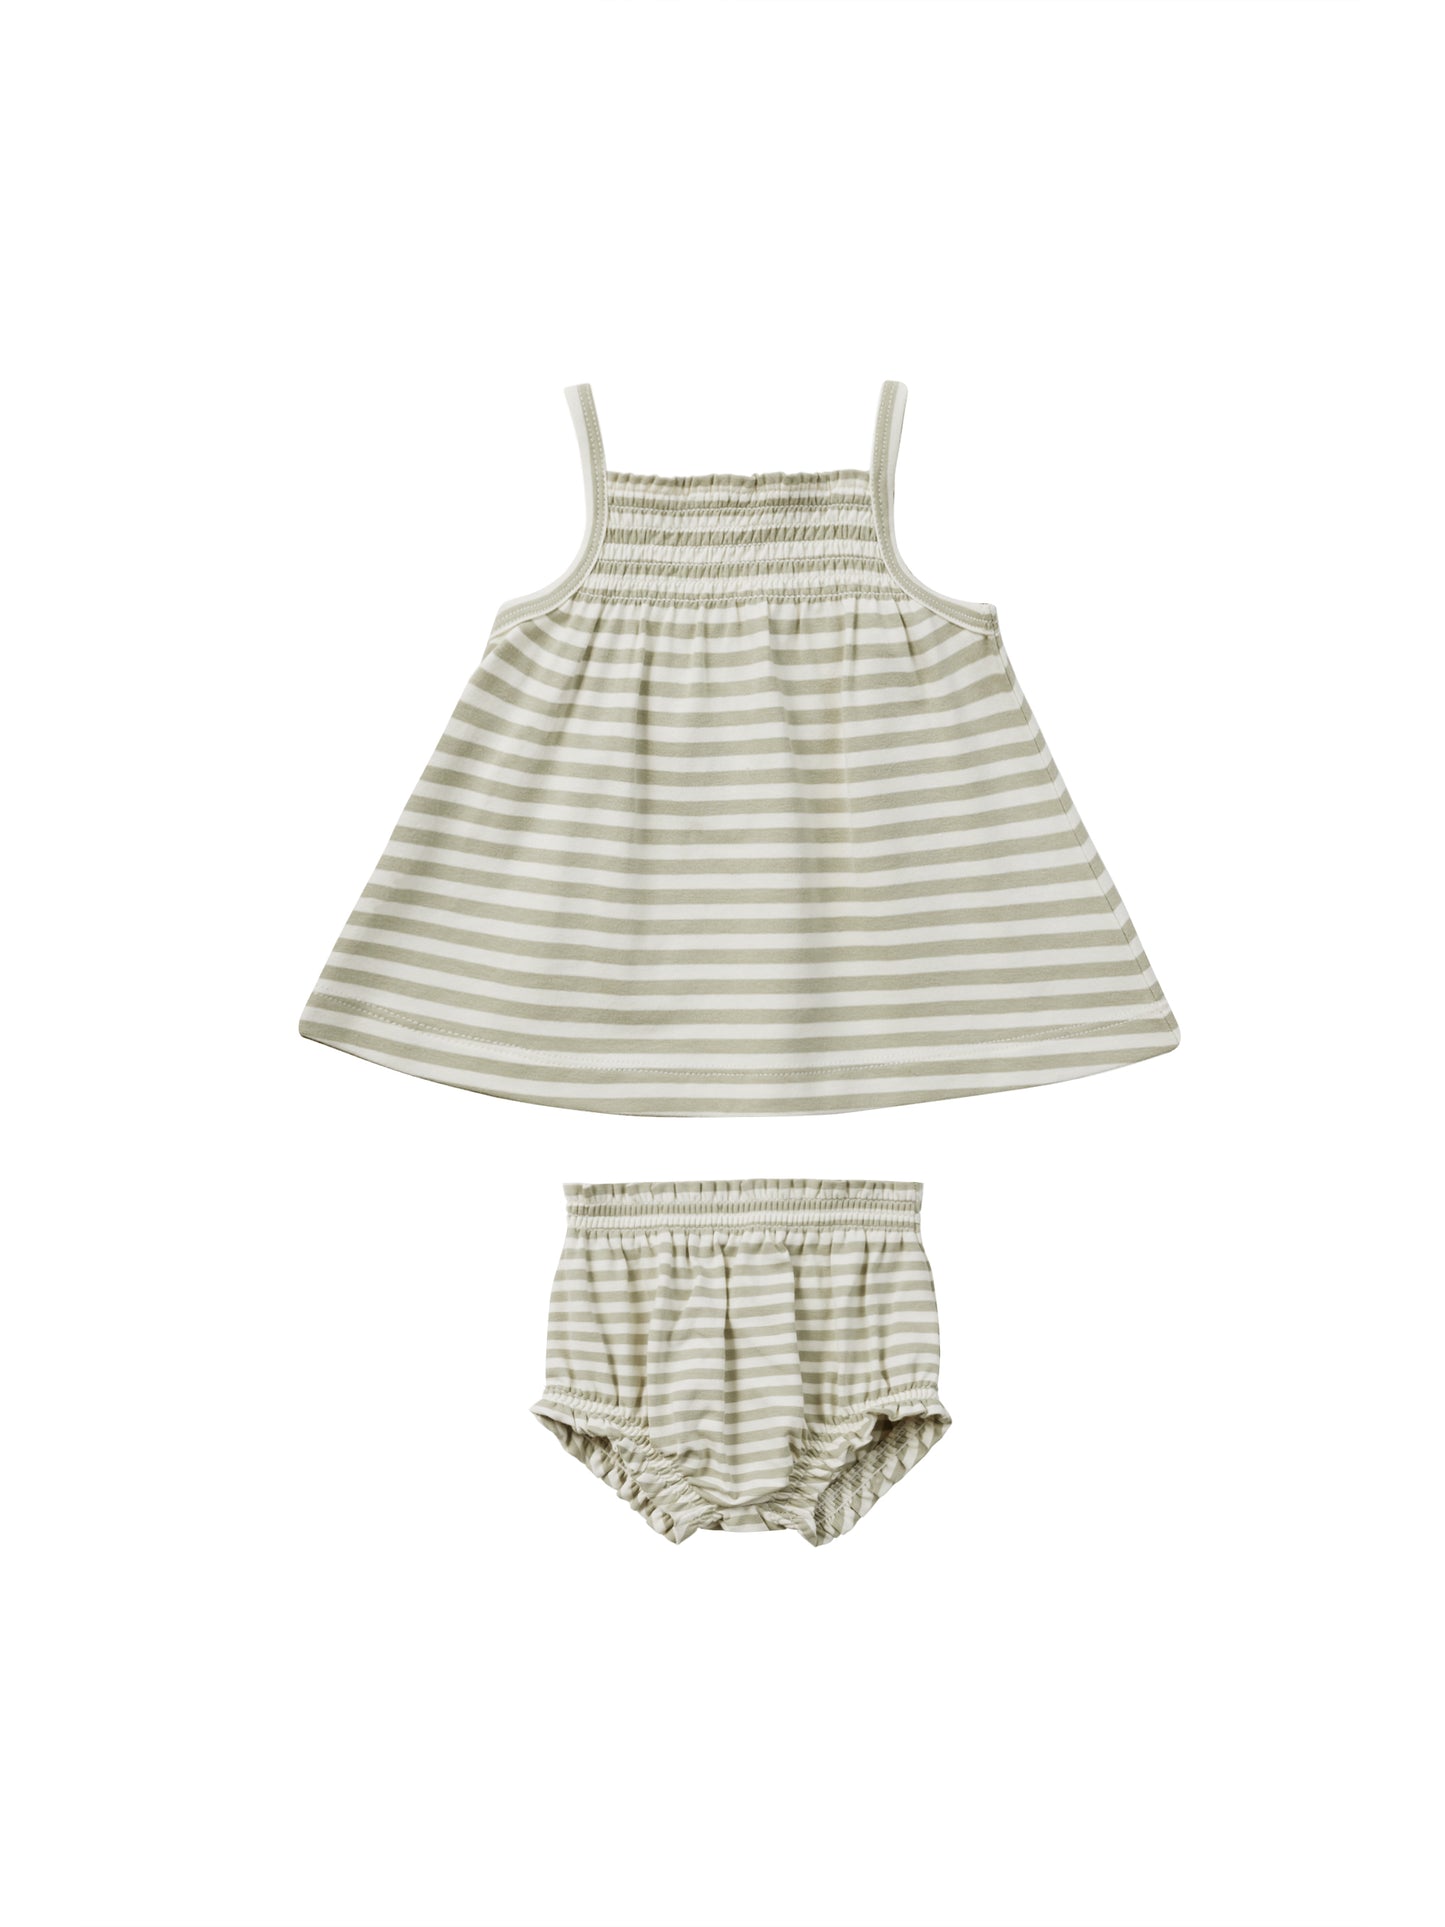 Quincy Mae SS24 Two Piece Sets